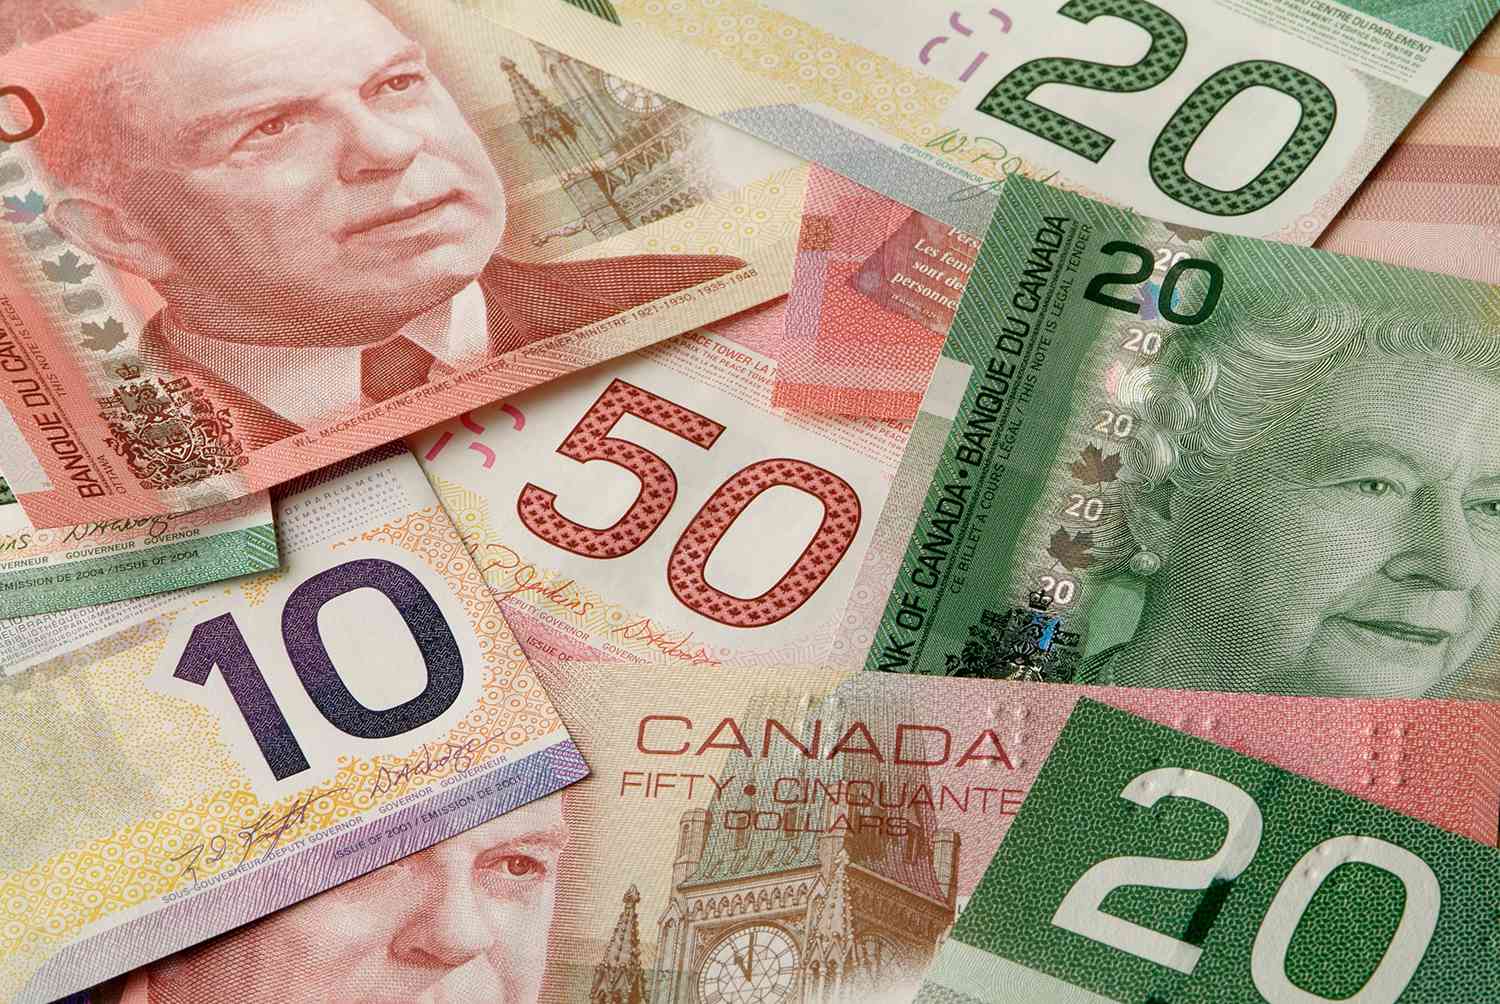 A Flattening of the Canadian Dollar on Thursday as Markets Anticipate the Release of the US NFP